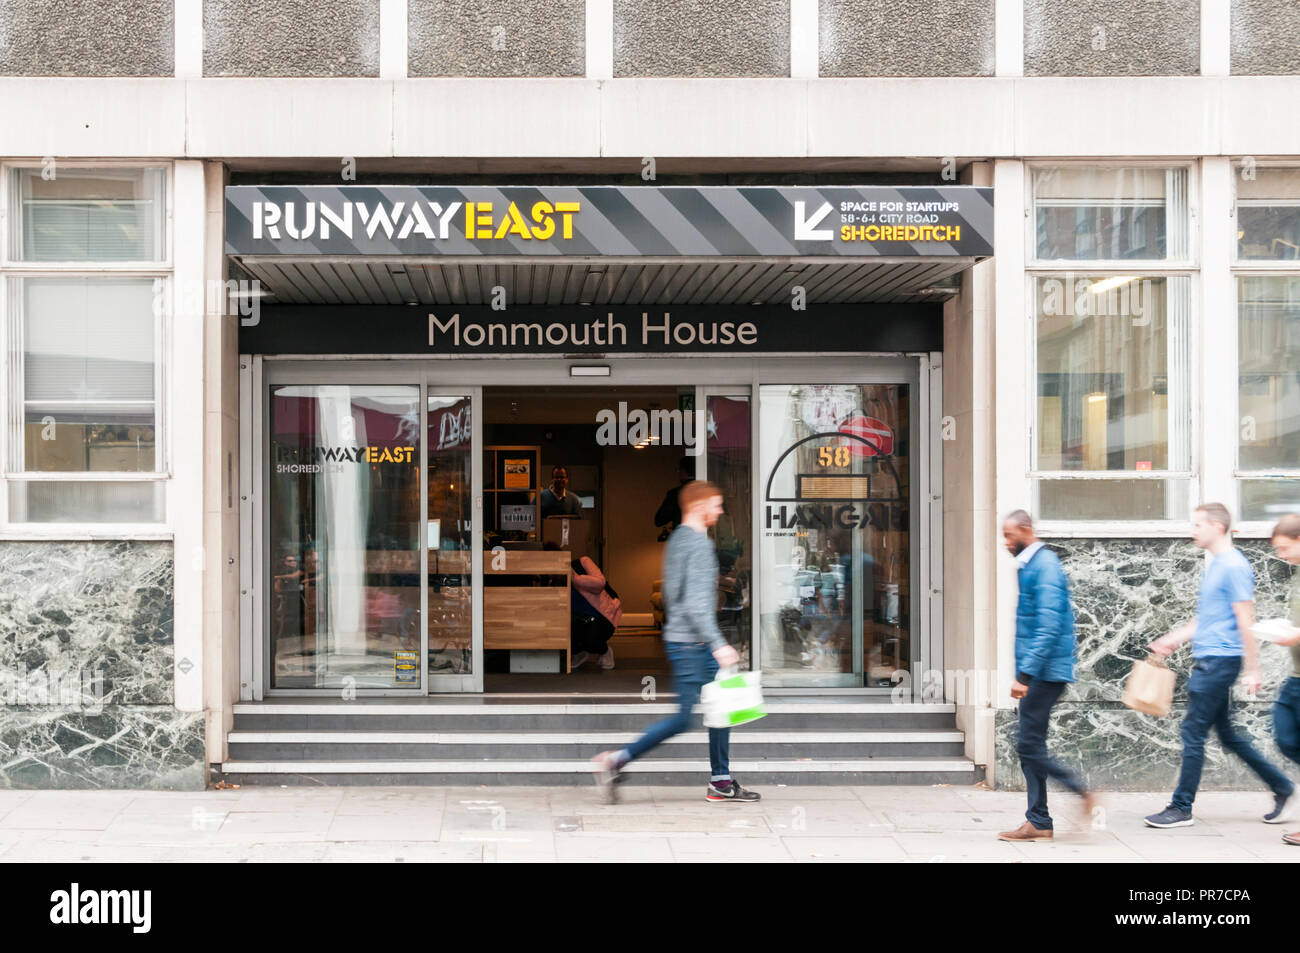 Runway East in City Road, London provides leasehold managed office space for startup companies. Stock Photo